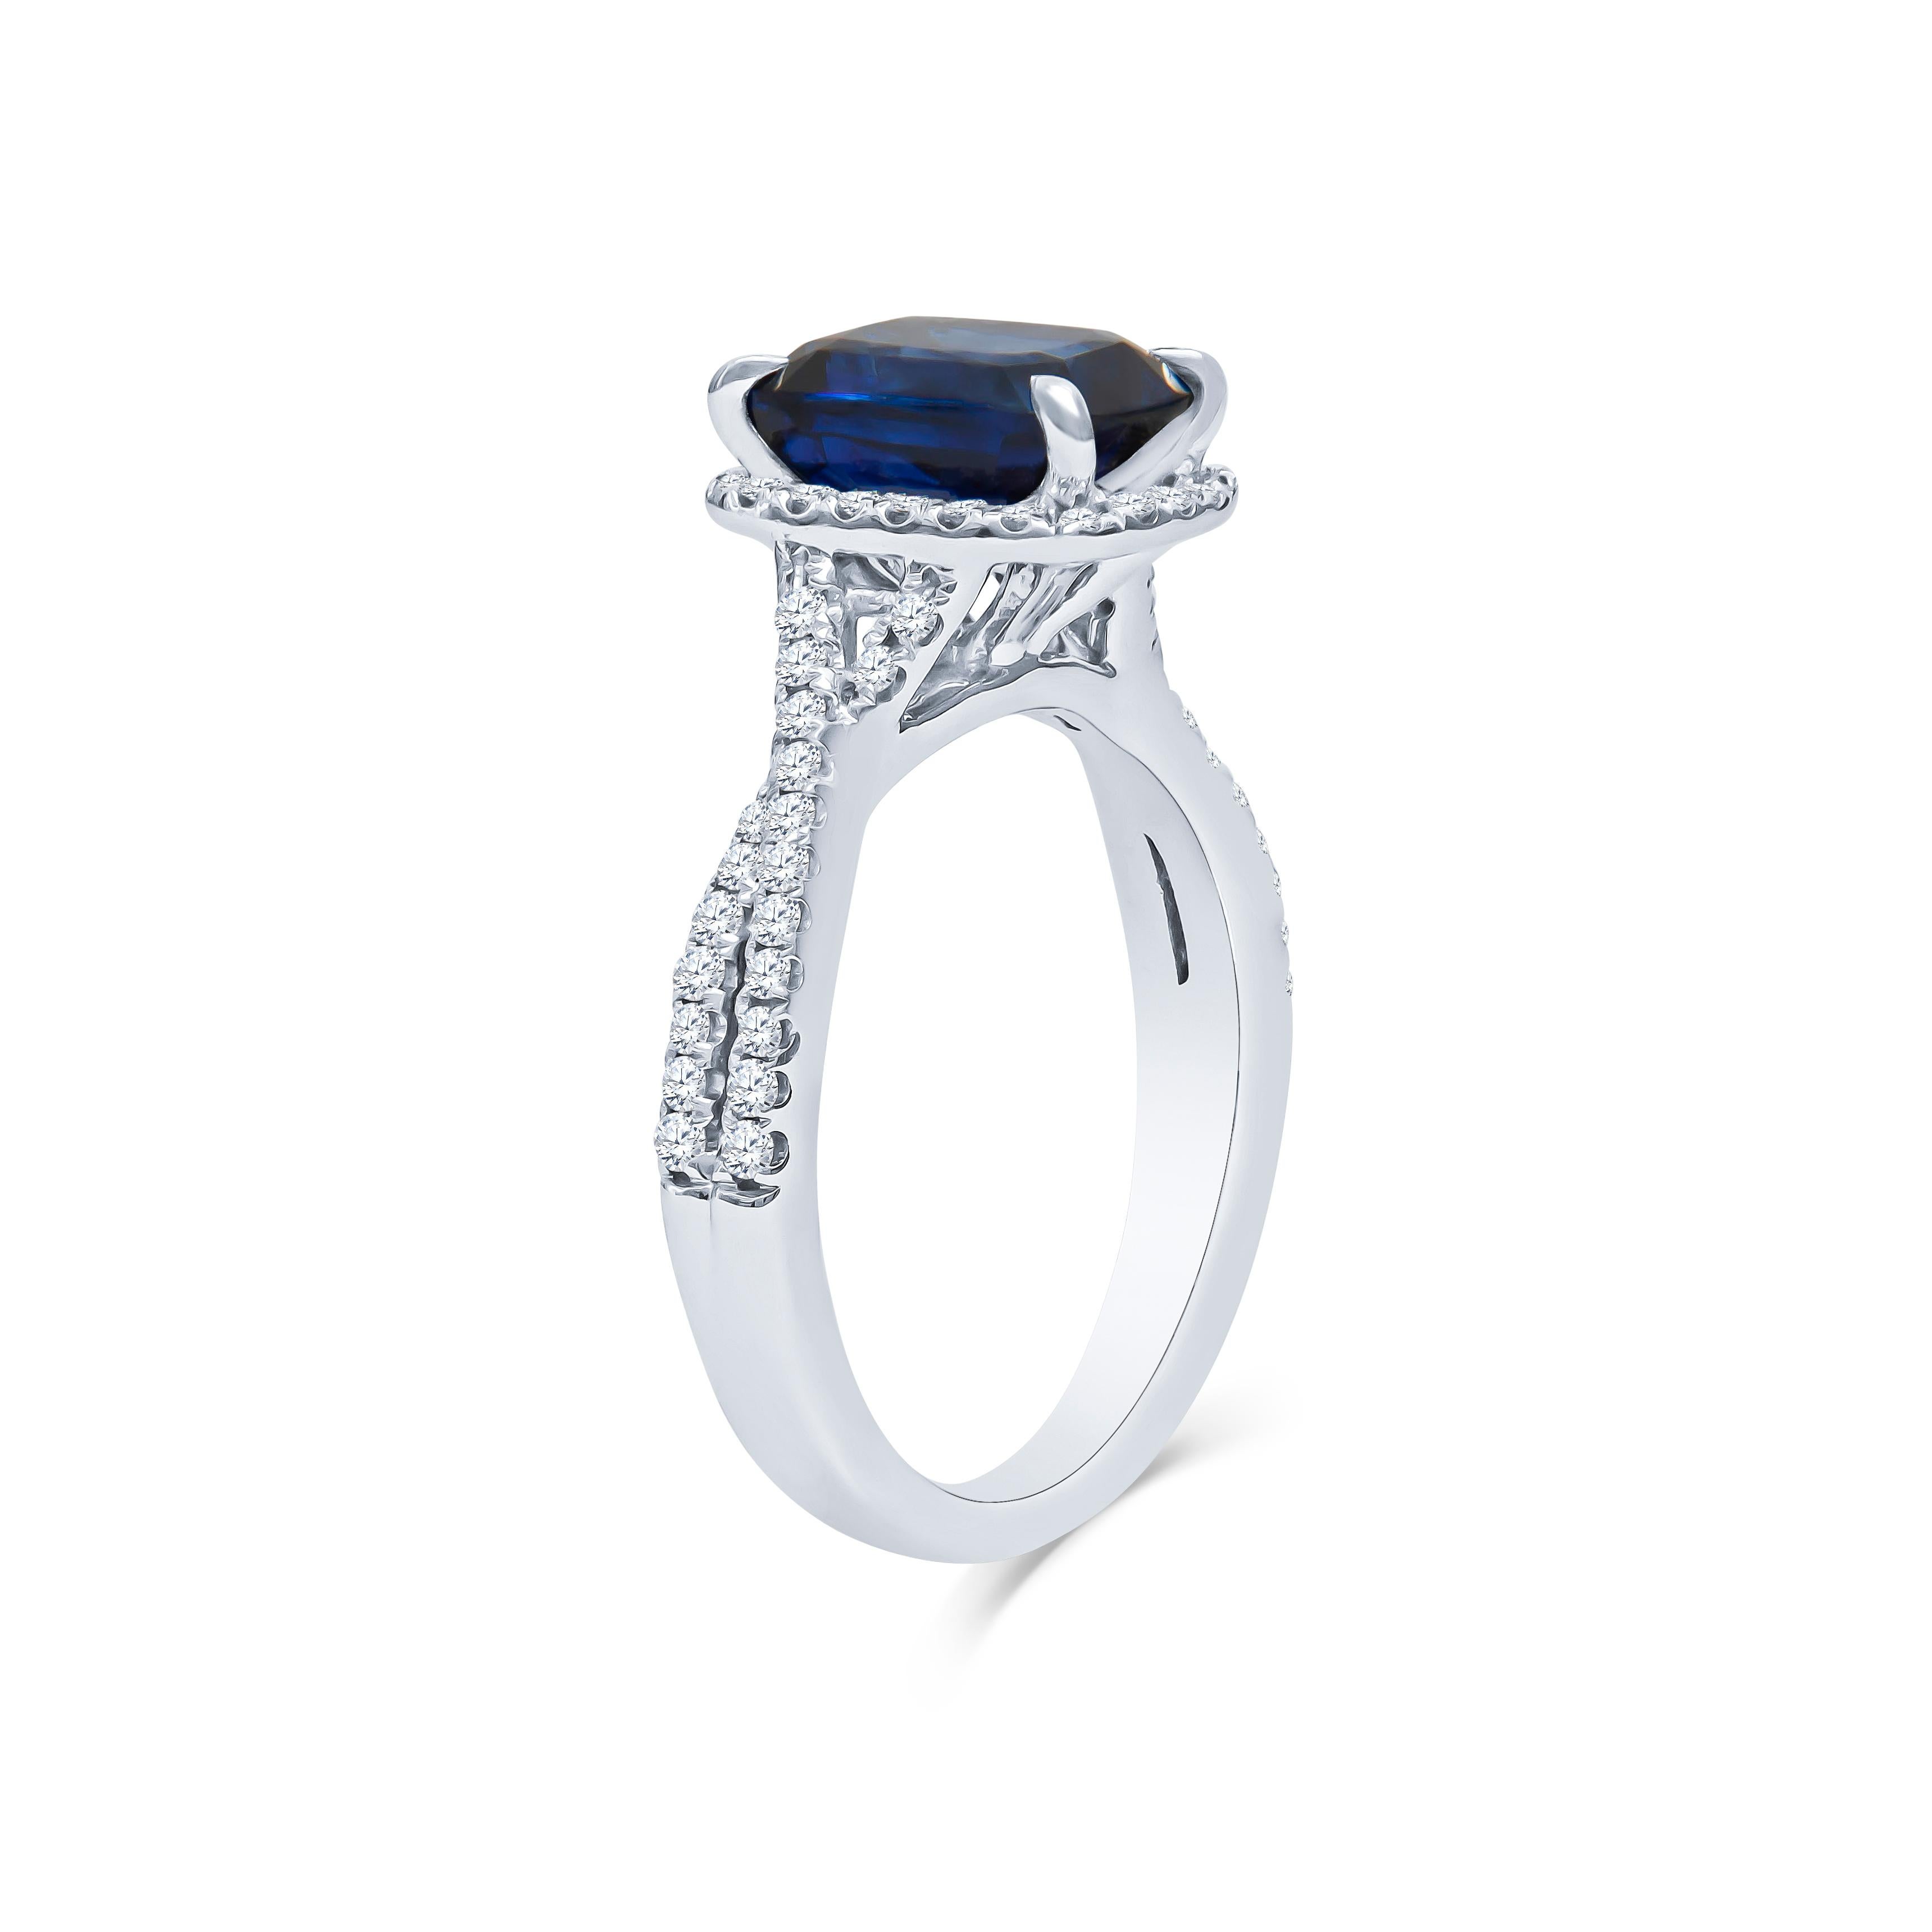 Creative and expertly hand-crafted; A dazzling halo set with a 3.04 carat cushion cut natural royal blue sapphire set in an 18K white gold diamond setting that carries 0.40 carats total of round brilliant diamonds. The sapphire is a lovely, rich